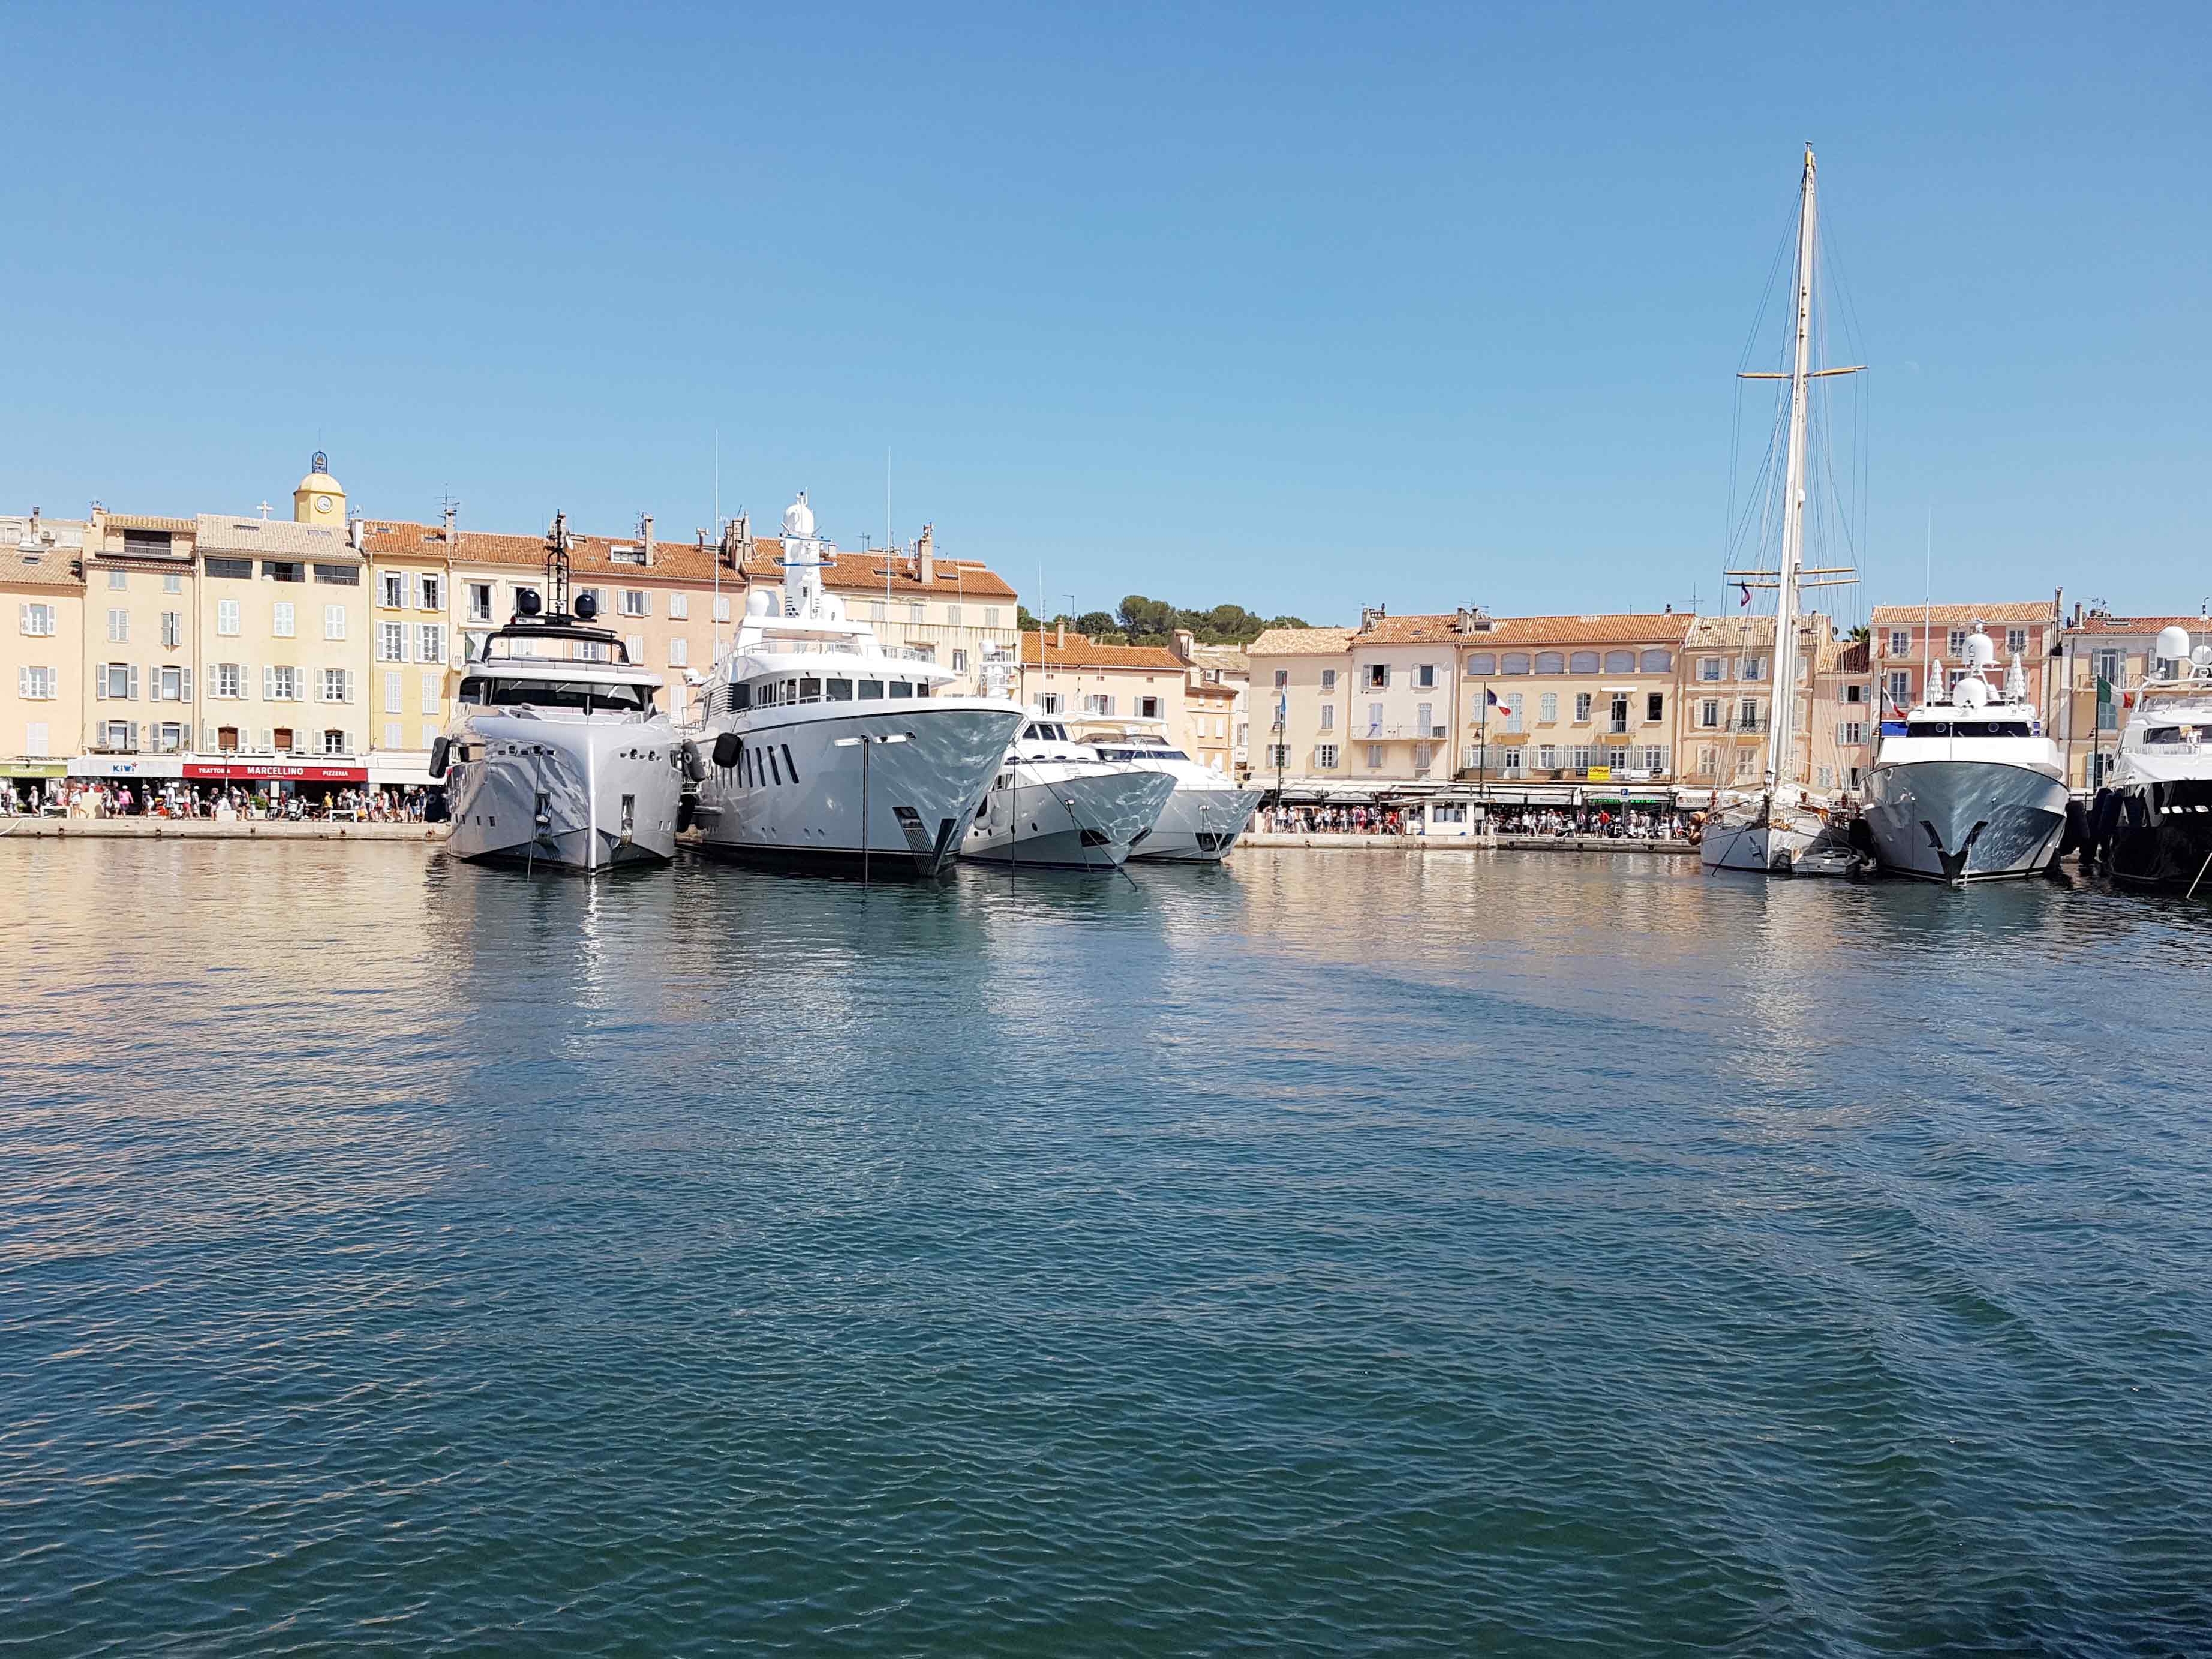 A view of boats docked in the harbour at Porte de Saint-Tropez  